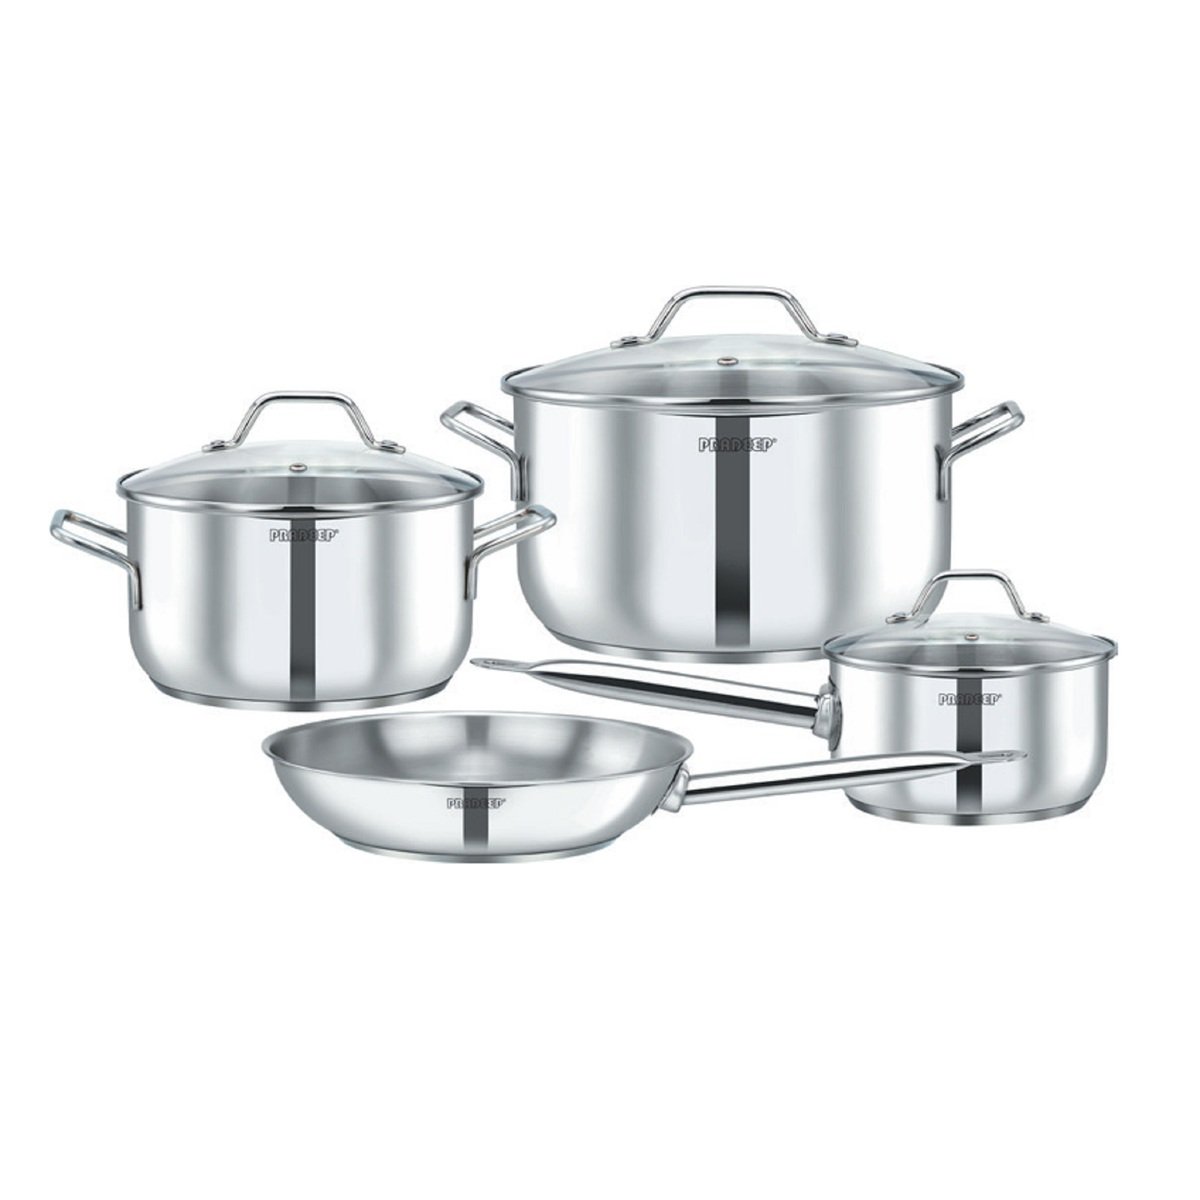 Pradeep Stainless Steel Cookware Set with Glass Lid 7pc